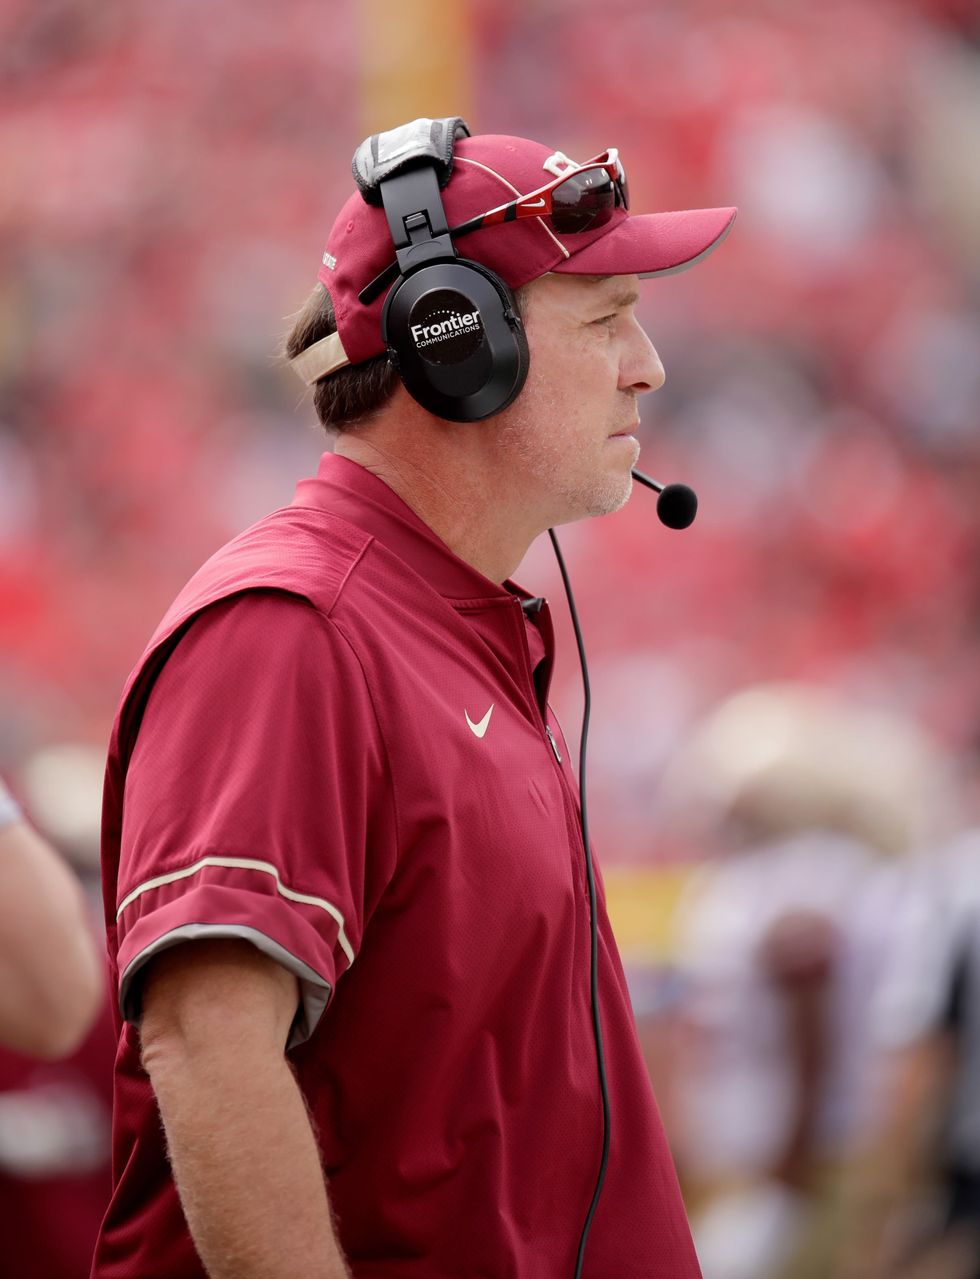 John Granato: A&M story shows serious flaws with NCAA's transfer rules